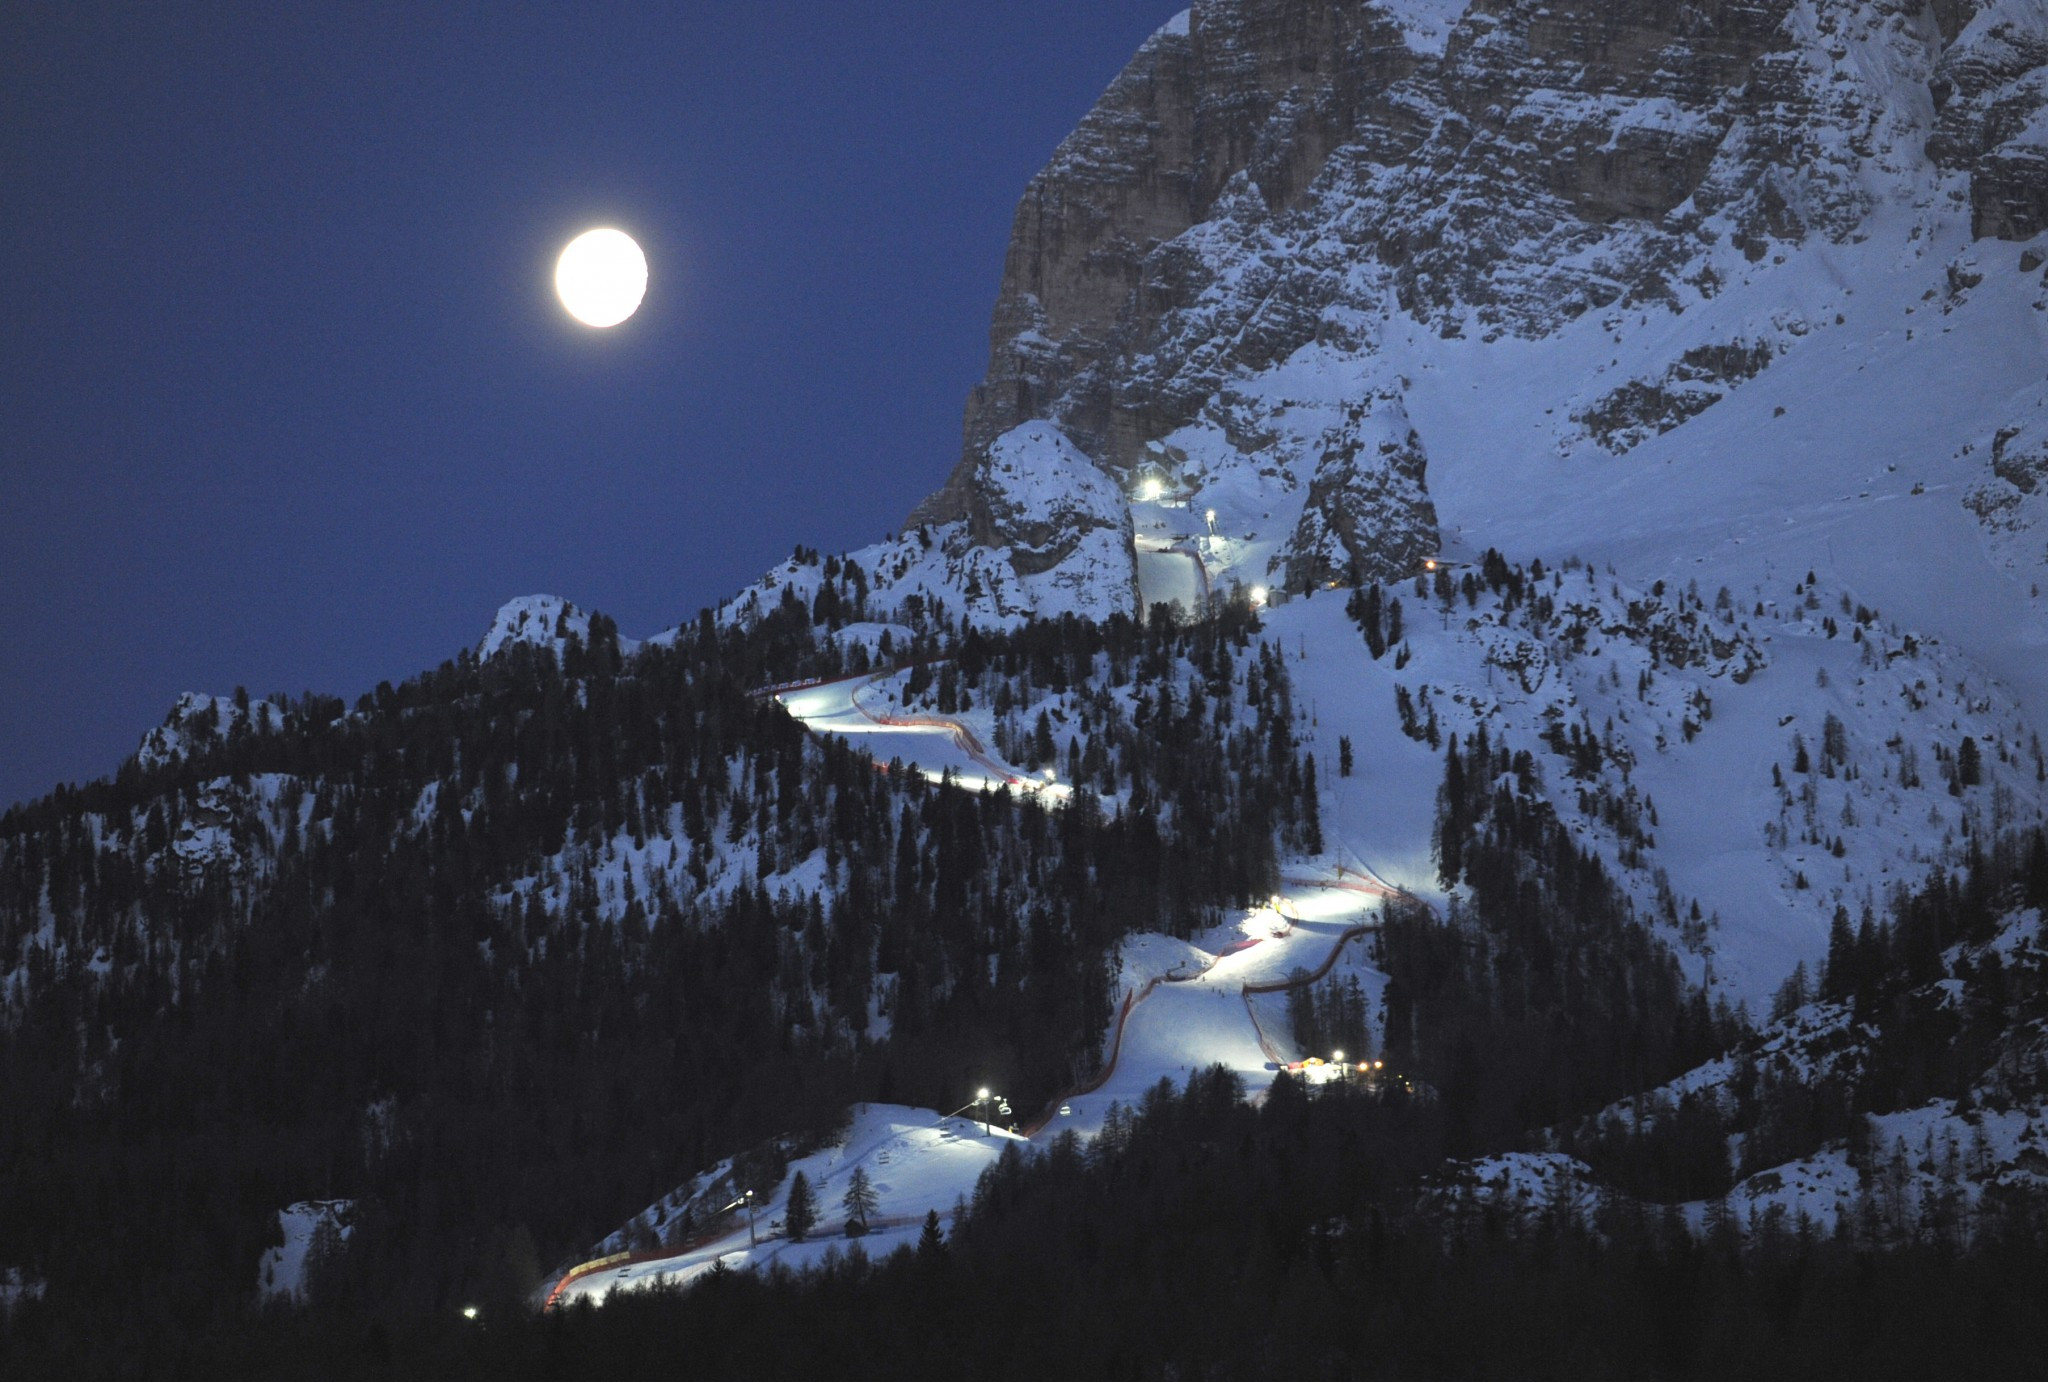 Work begins on technical course for 2021 FIS Alpine World Ski Championships in Cortina d’Ampezzo 